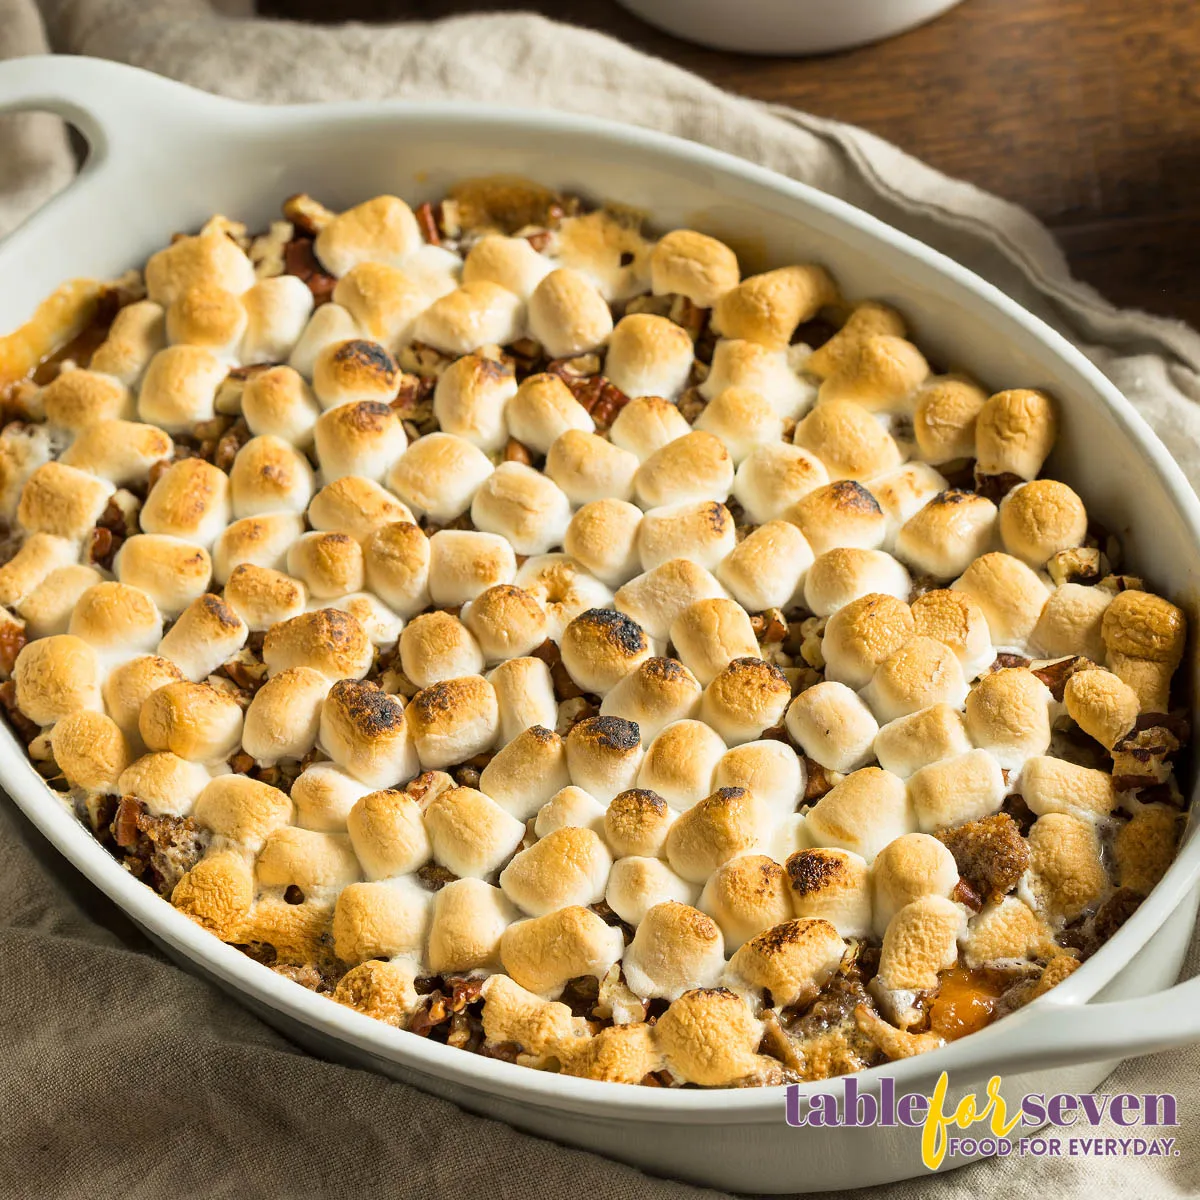 Sweet Potato Casserole With Marshmallows ready out of oven